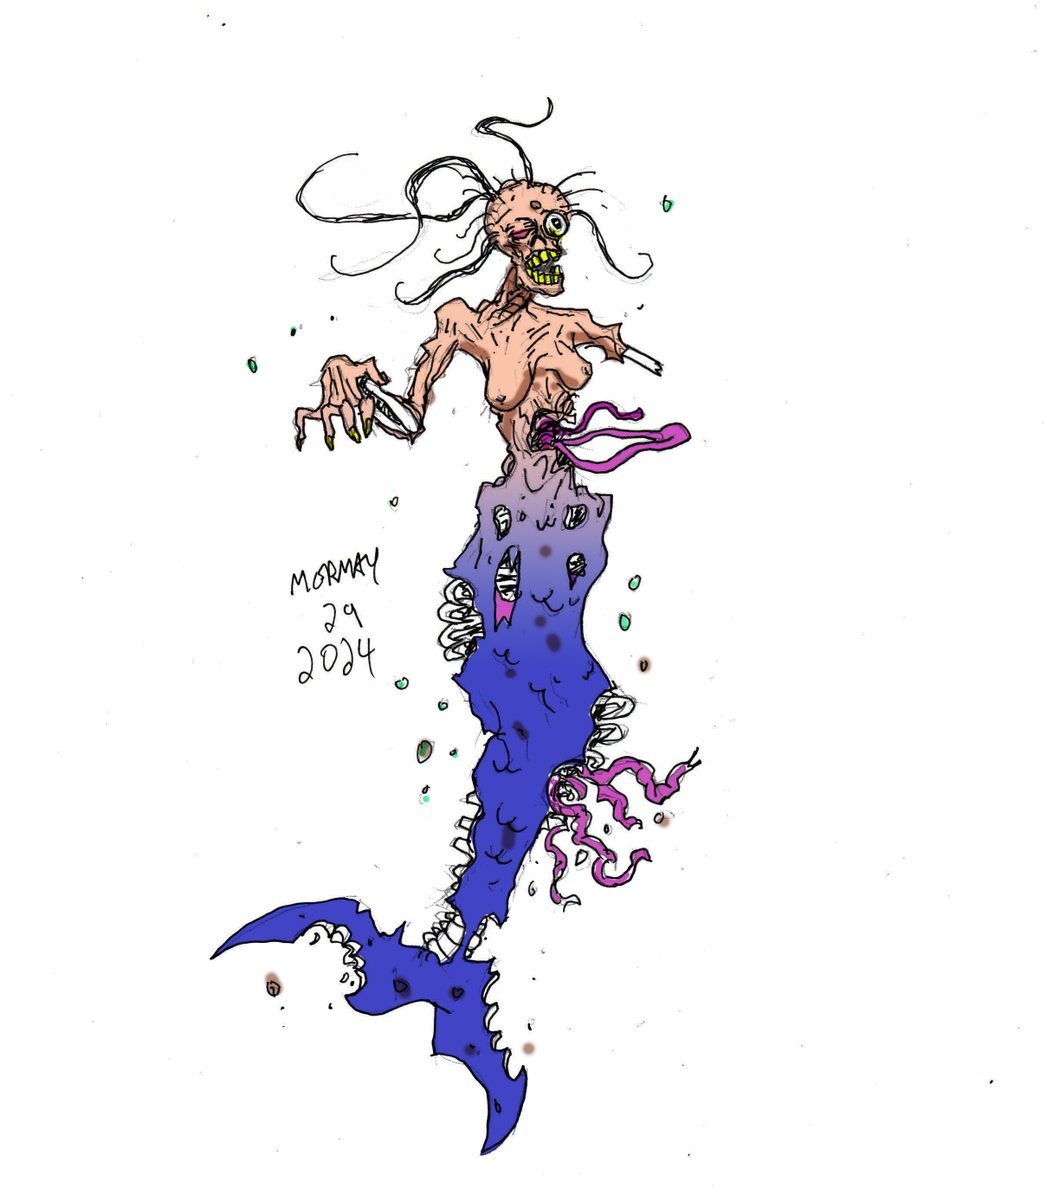 Mermay 29. The zombie virus has made it to the mermaids! #mermay #mermy2024 #mermay29 #zombie #mermaid